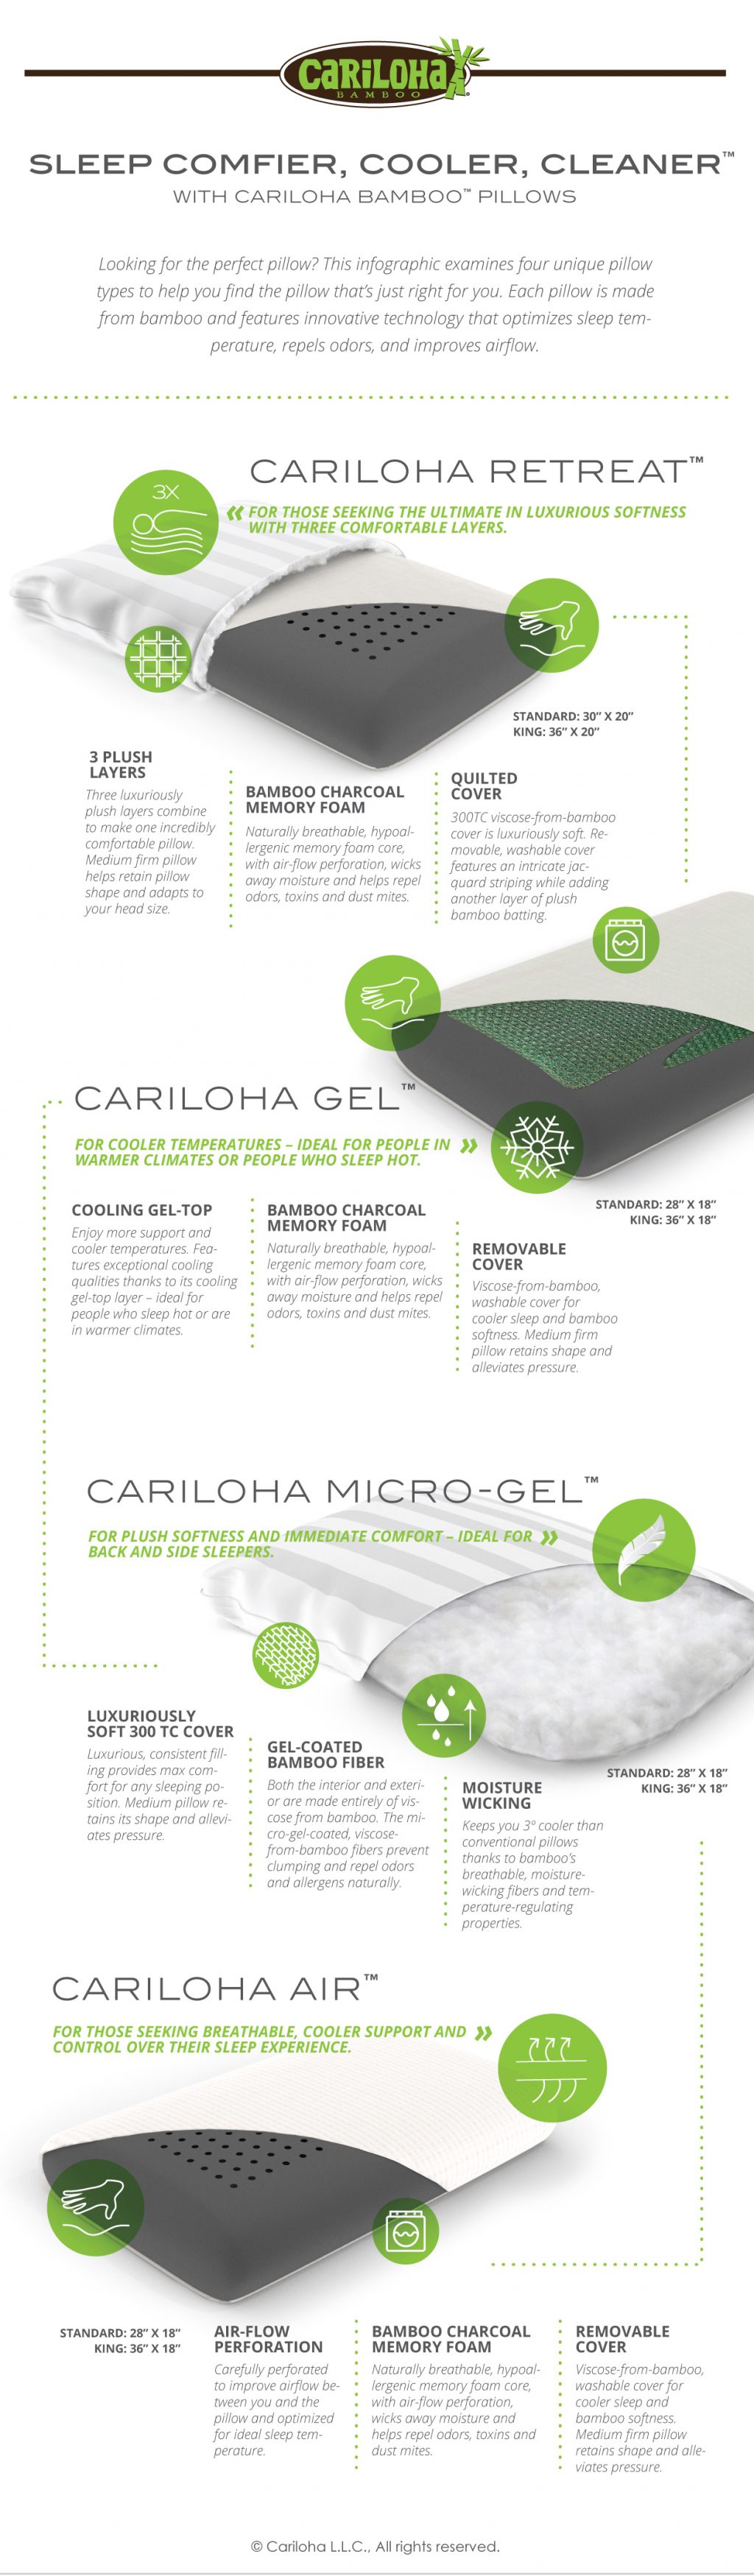 Sleep Comfier, Cooler, Cleaner with Cariloha Bamboo Pillows